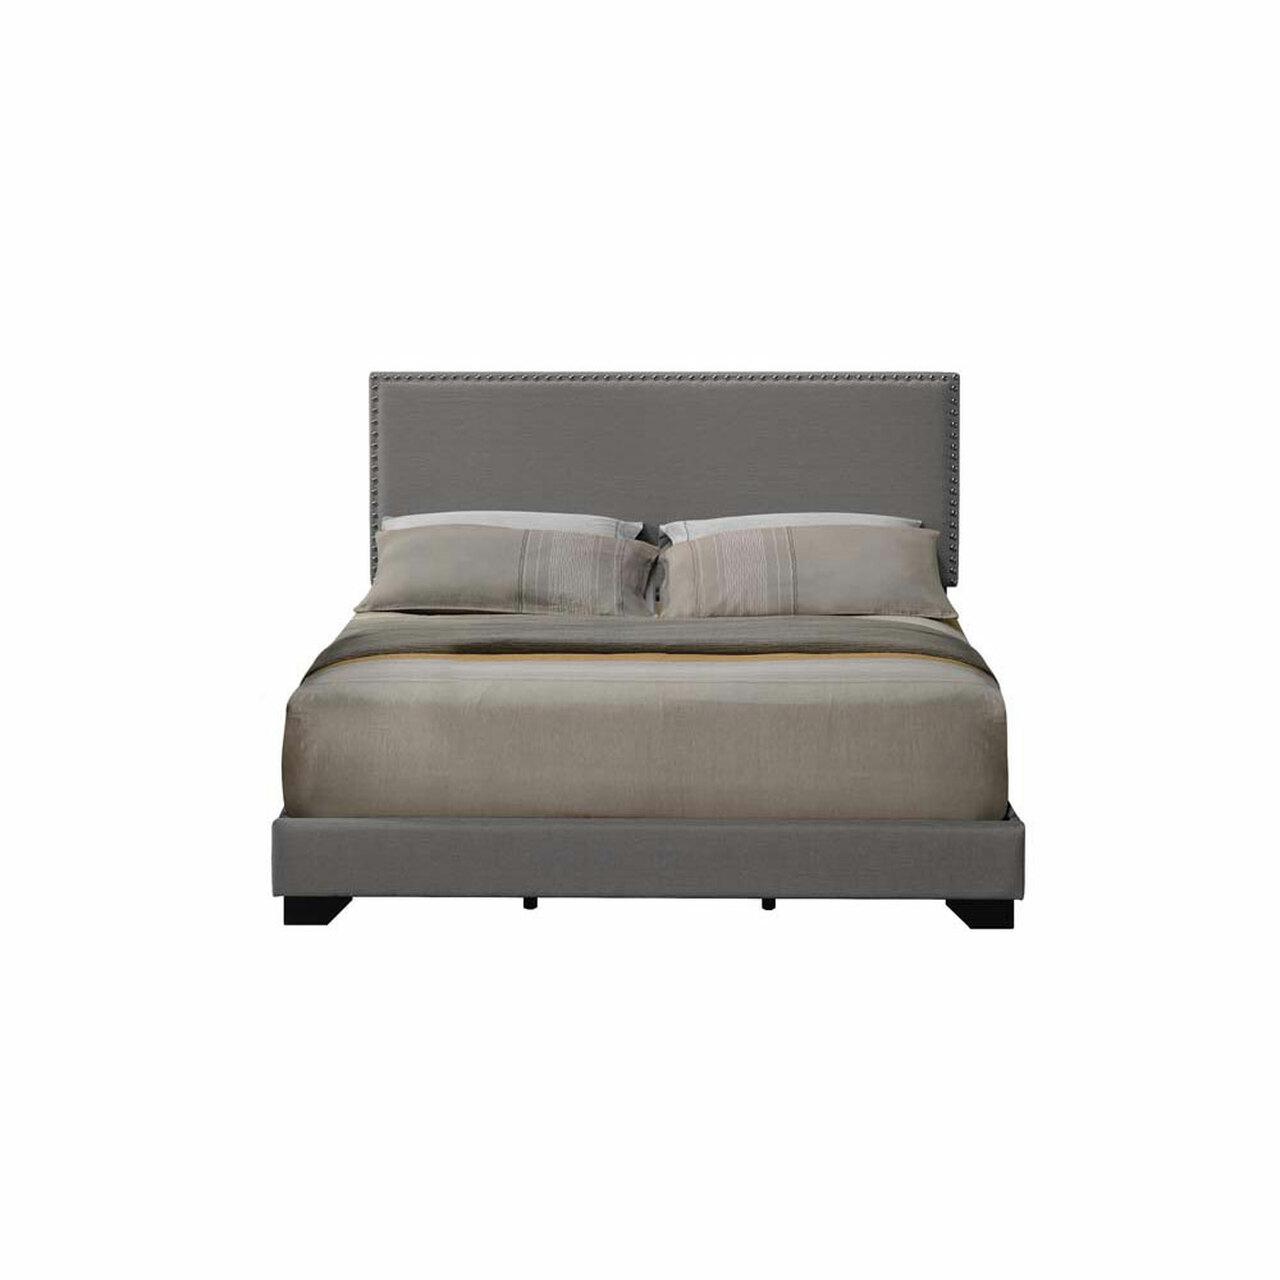 Acme Furniture Leandros Queen Bed